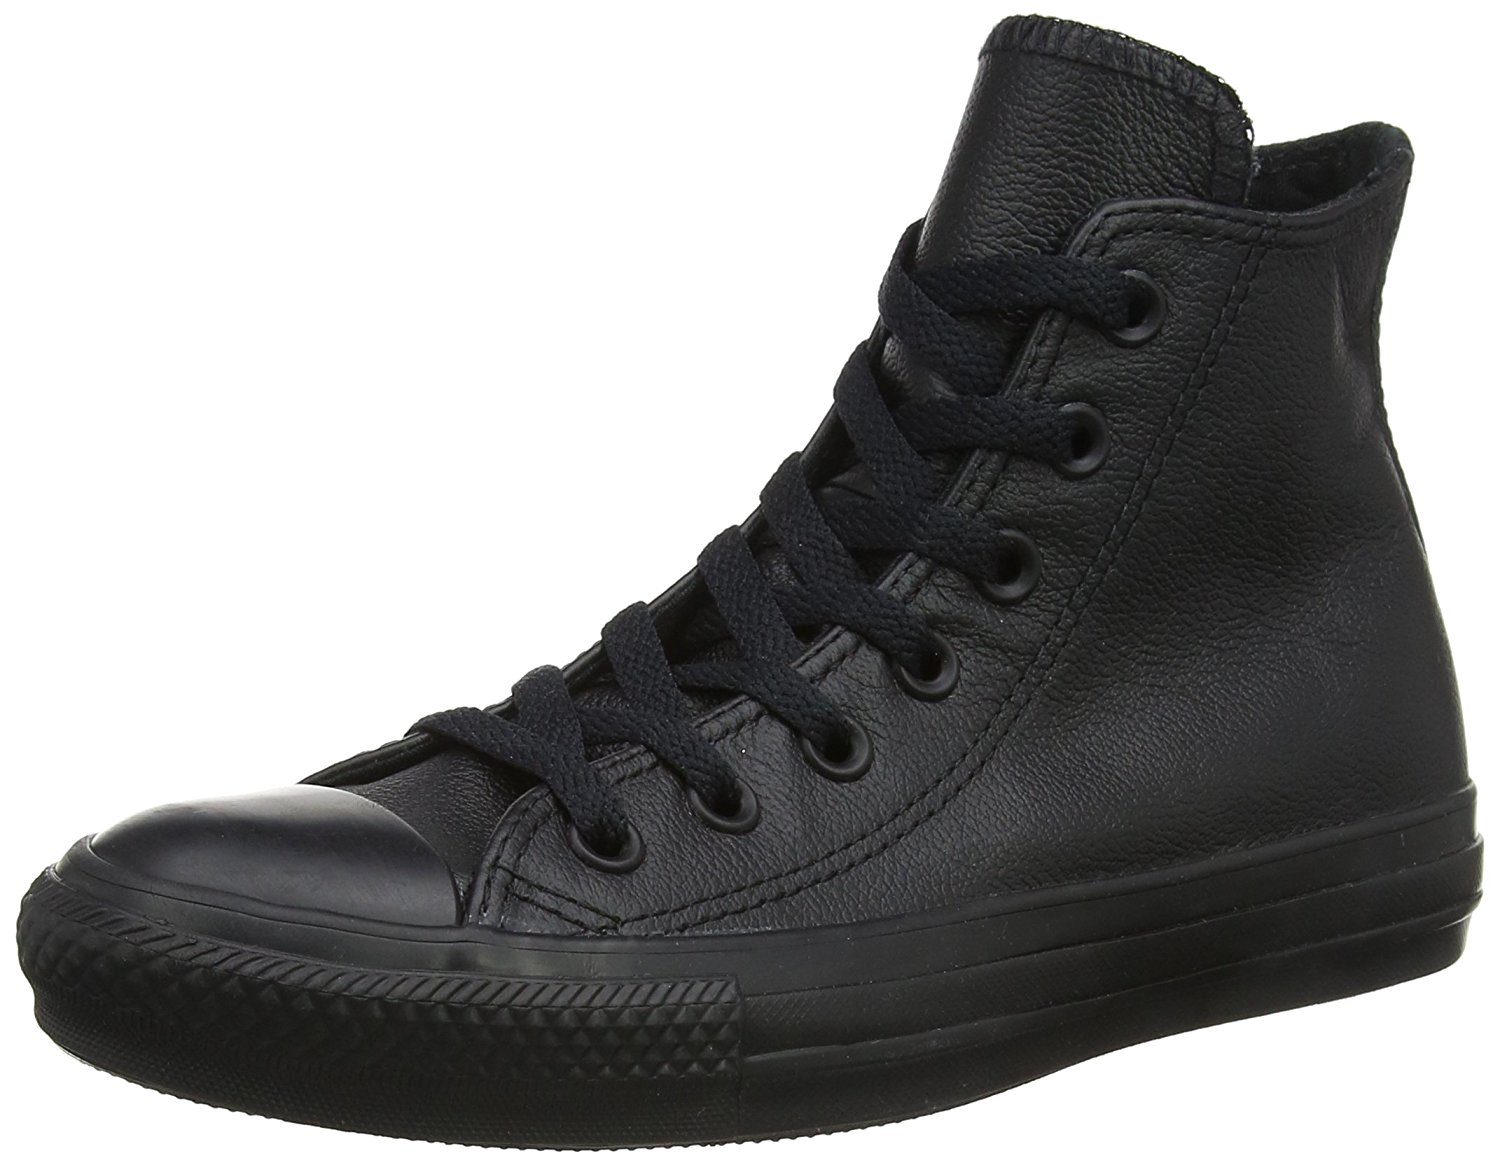 Converse-Chuck-Taylor-All-Star-Leather-High-Top-Sneaker